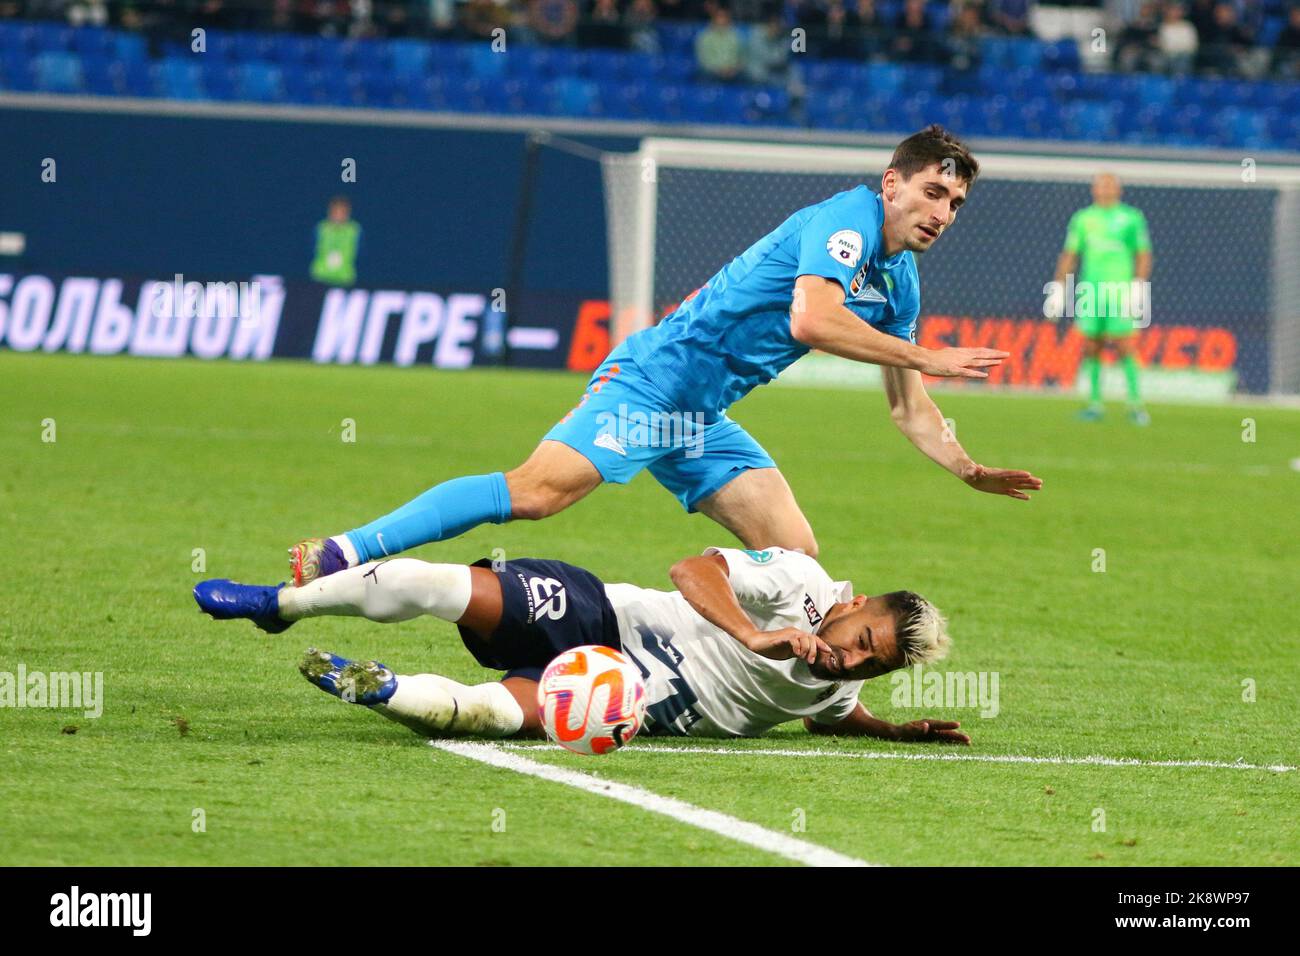 Saint Petersburg, Russia. 24th Oct, 2022. Zelimkhan Bakaev (Blue) of Zenit and Christian Noboa (White) of Sochi seen in action during the Russian Premier League football match between Zenit Saint Petersburg and Sochi at Gazprom Arena. Final score; Zenit 7:0 Sochi. Credit: SOPA Images Limited/Alamy Live News Stock Photo